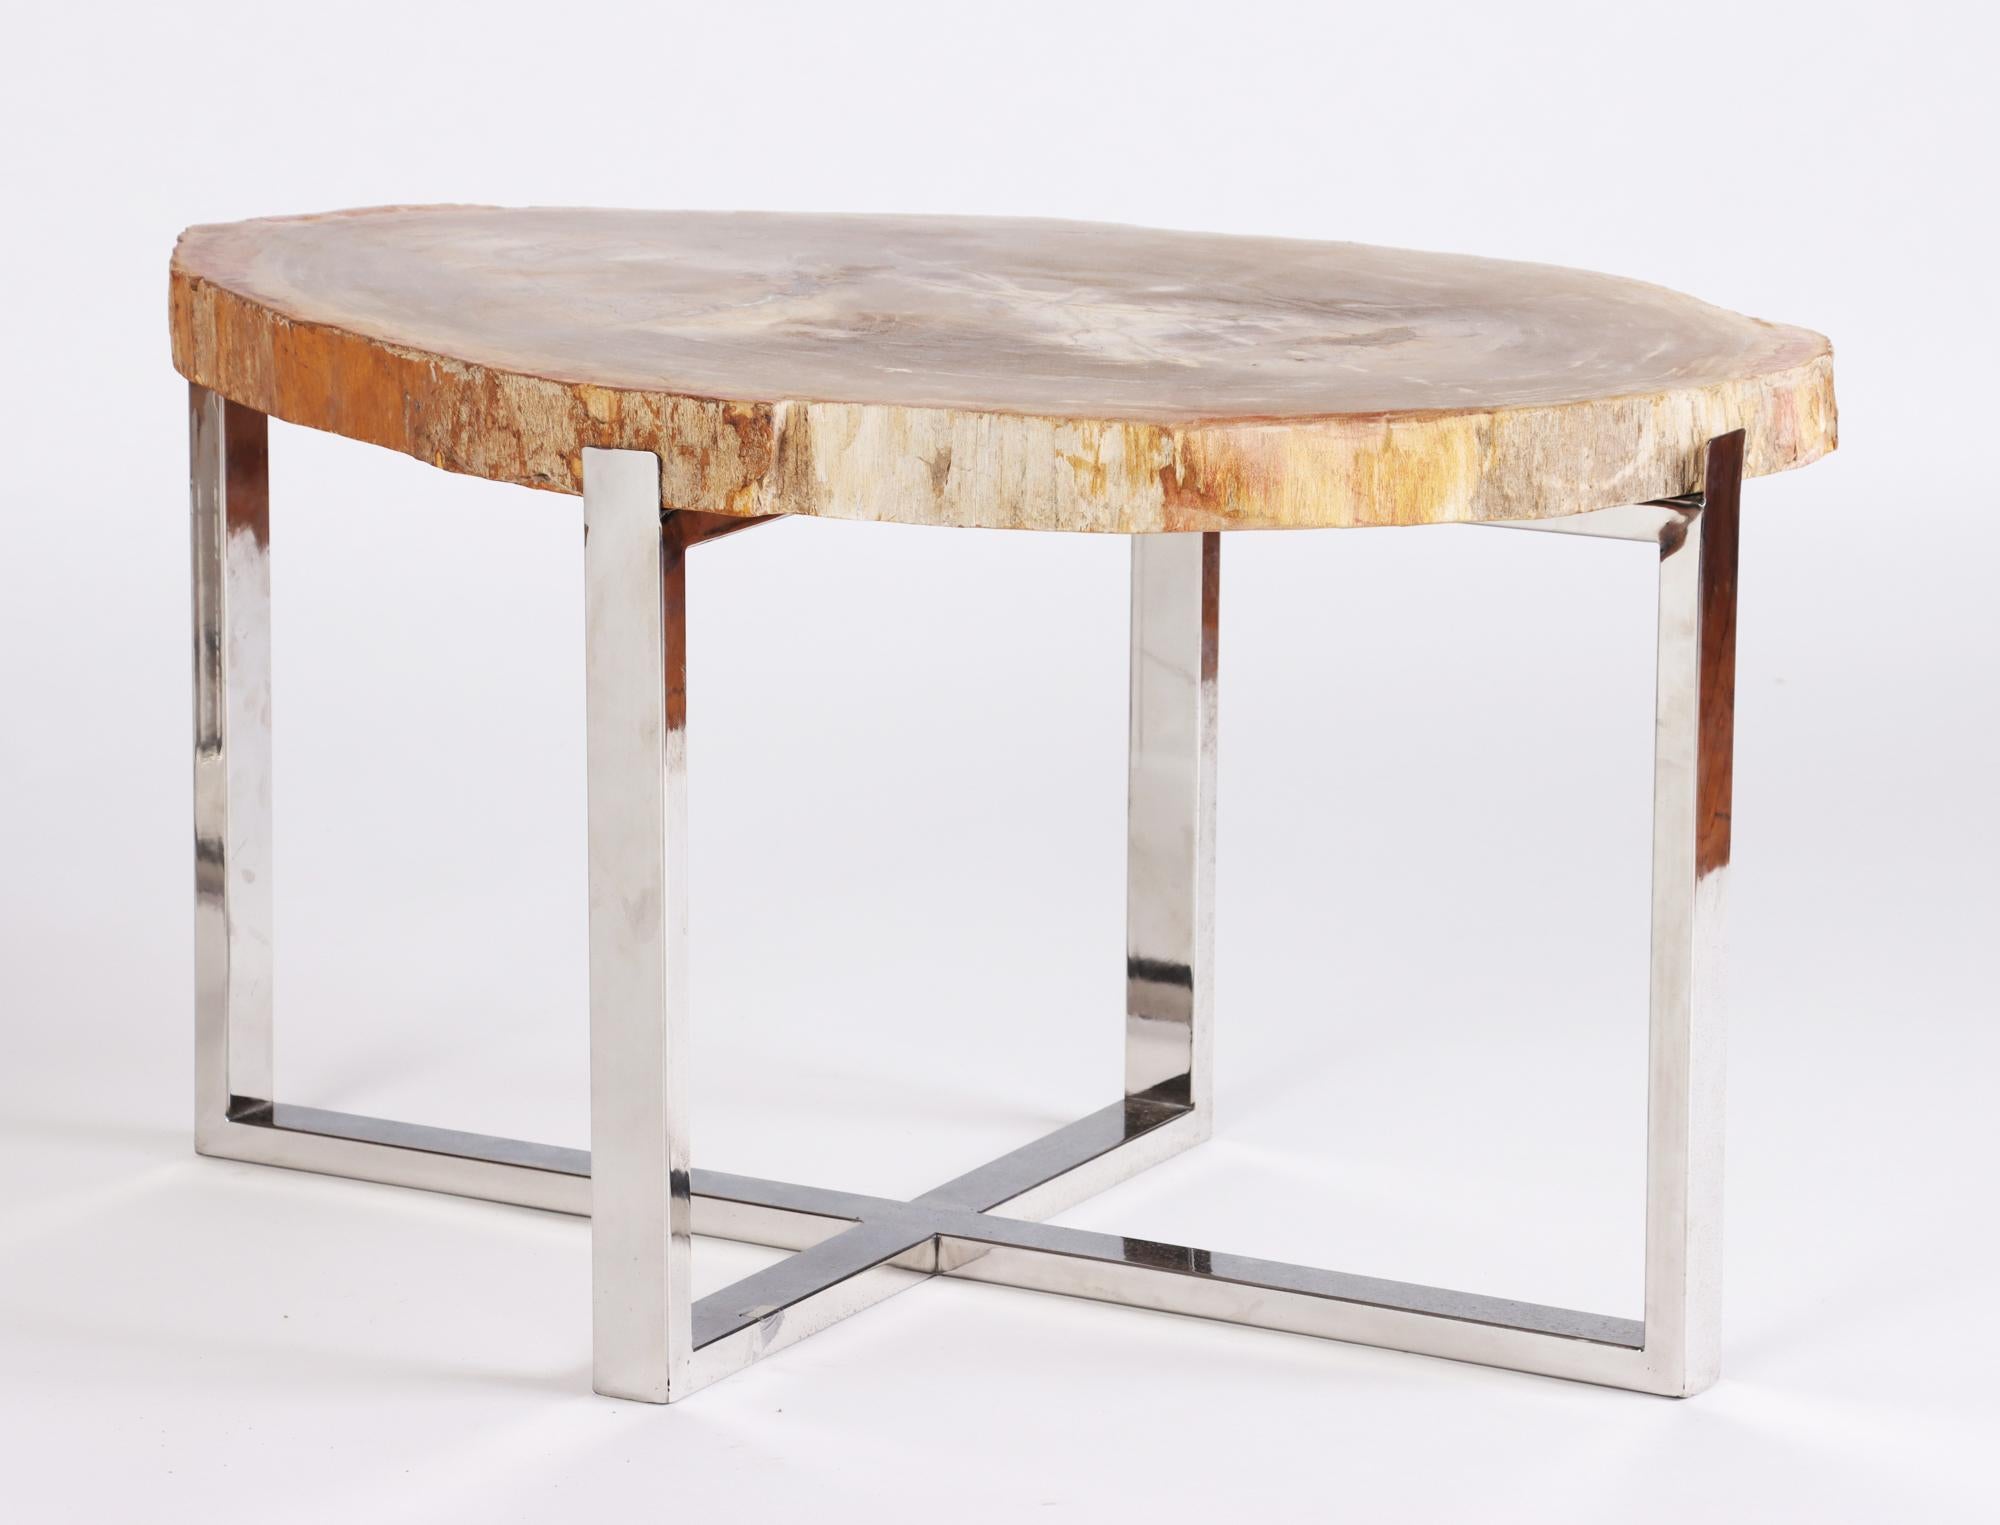 A pair of organic Modern petrified wood side tables on modern chrome bases, 21st C.